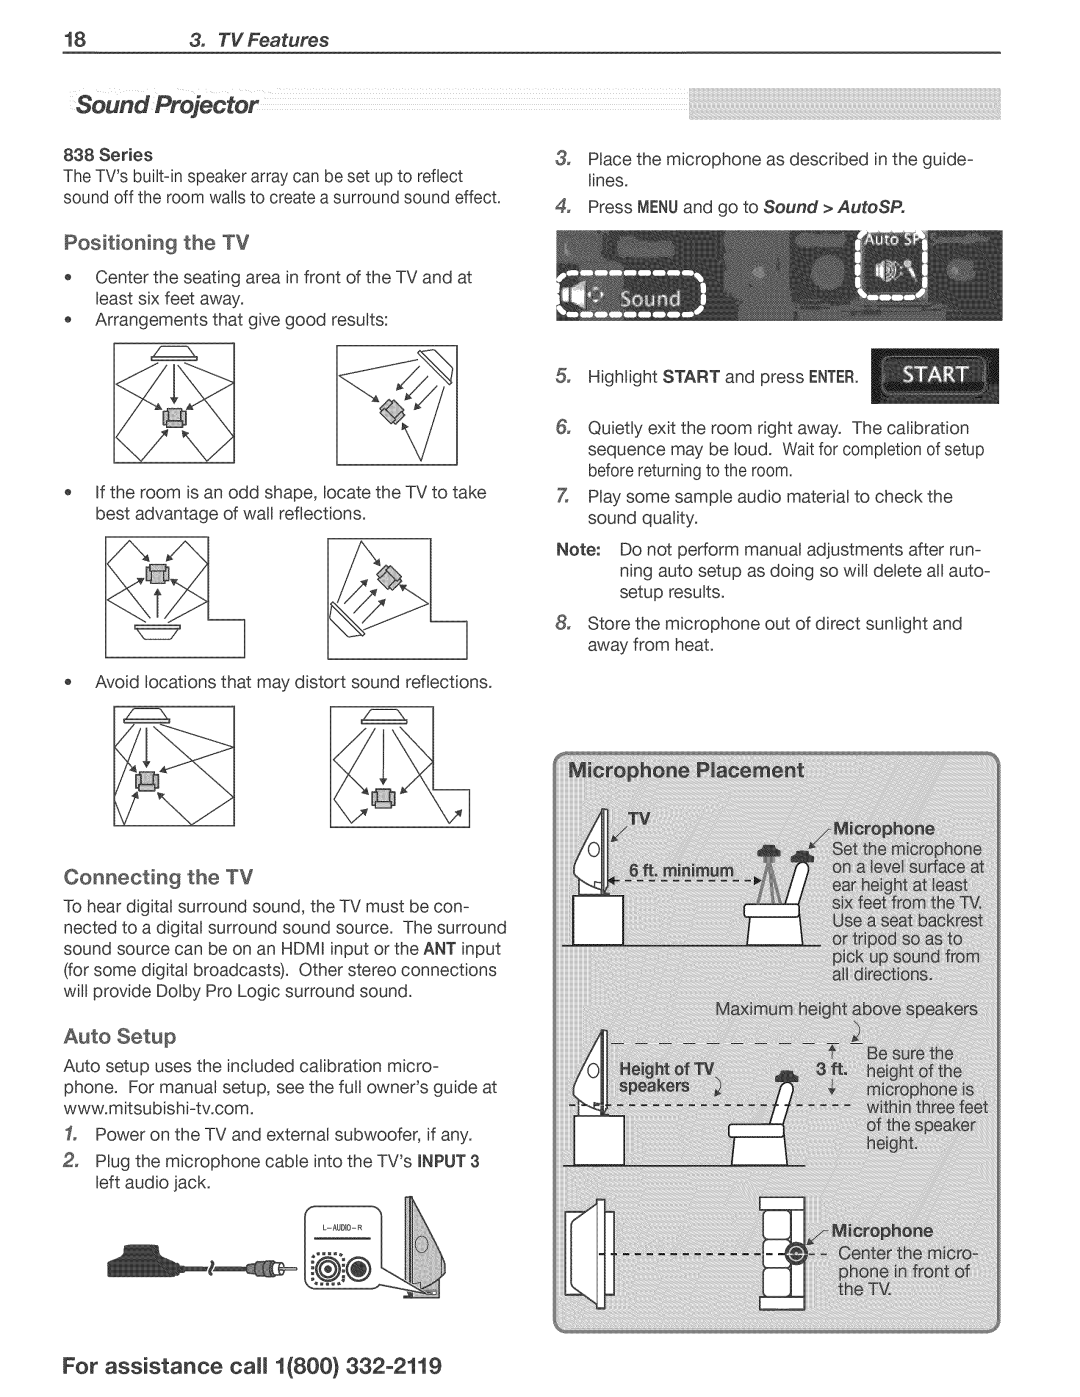 Mitsubishi Electronics 738, 838 manual Positioning the TV, Connecting the TV, Auto Setup, For assistance ca1800 